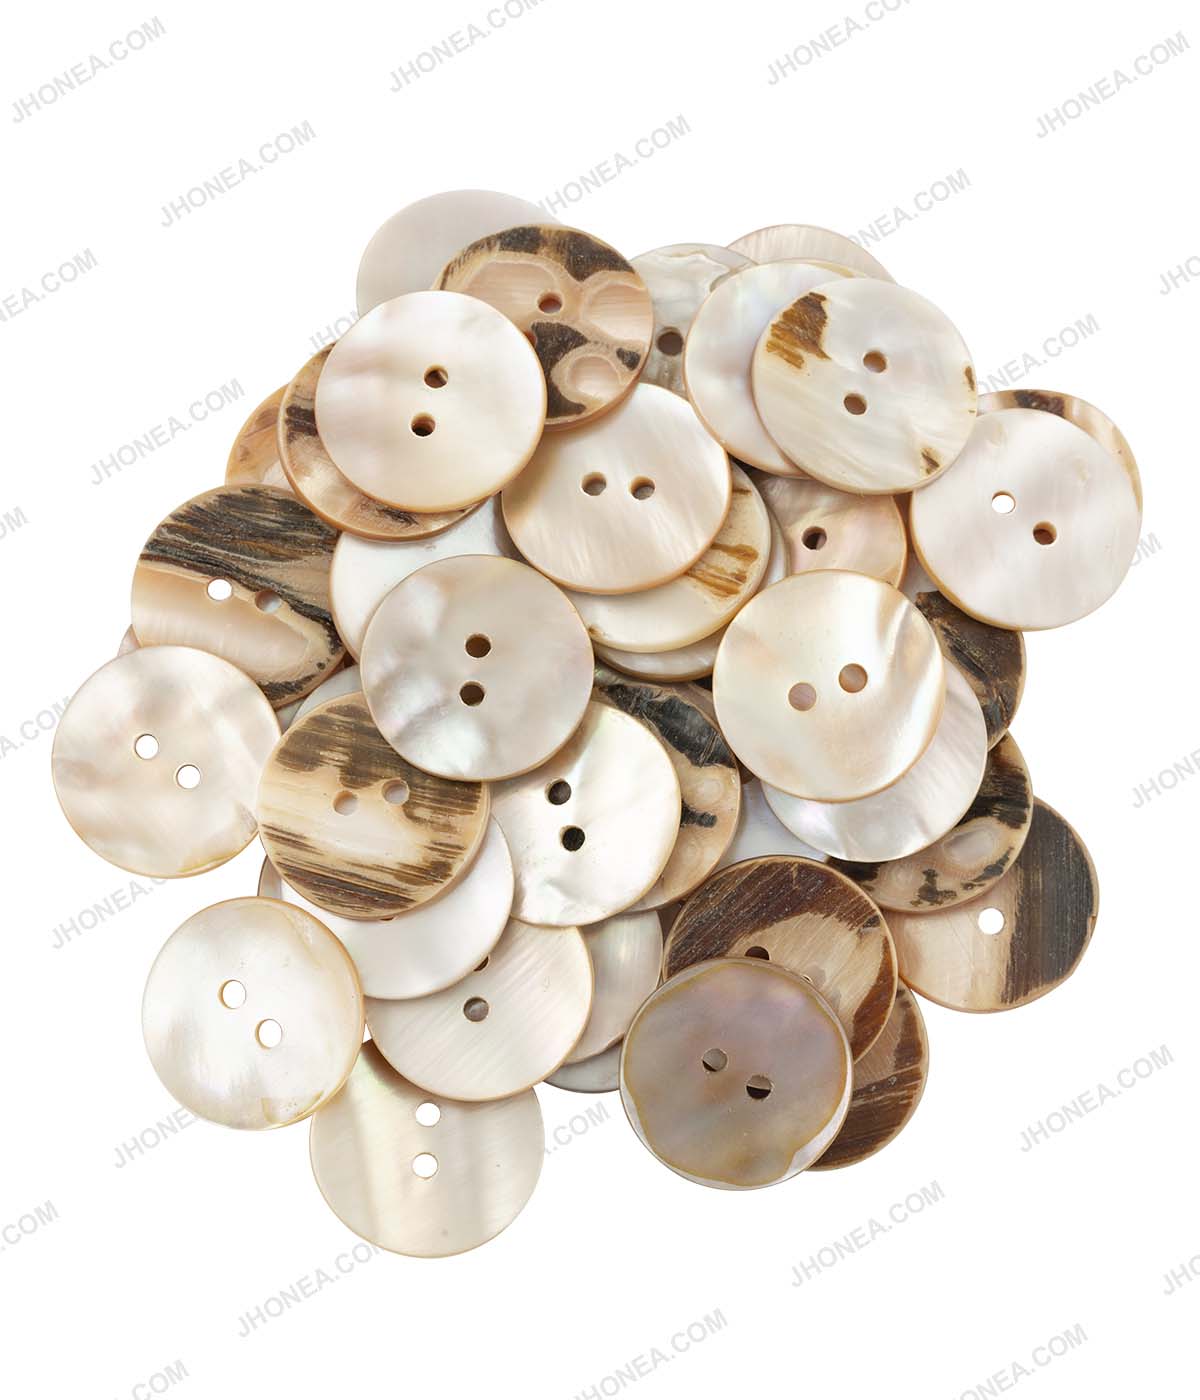 Glossy & Shiny Pearlescent White Shirt Buttons for Shirts/Blazers